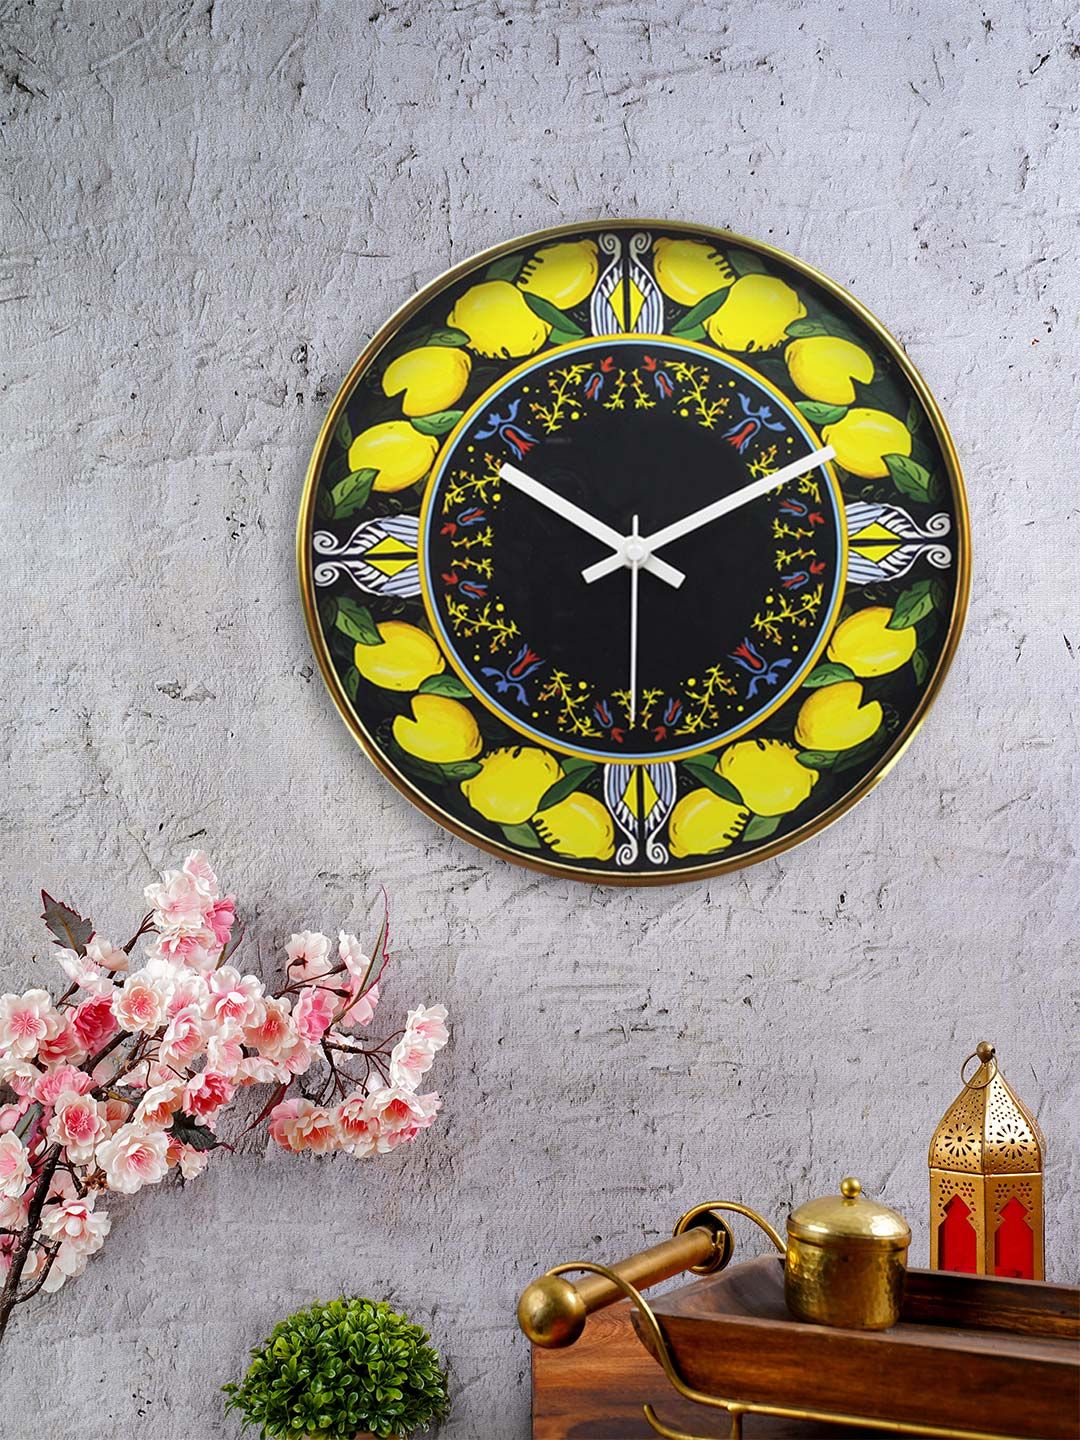 KOLOROBIA Black & Yellow Round Fruits of Italy Lemons Printed 30.4 cm Analogue Wall Clock Price in India